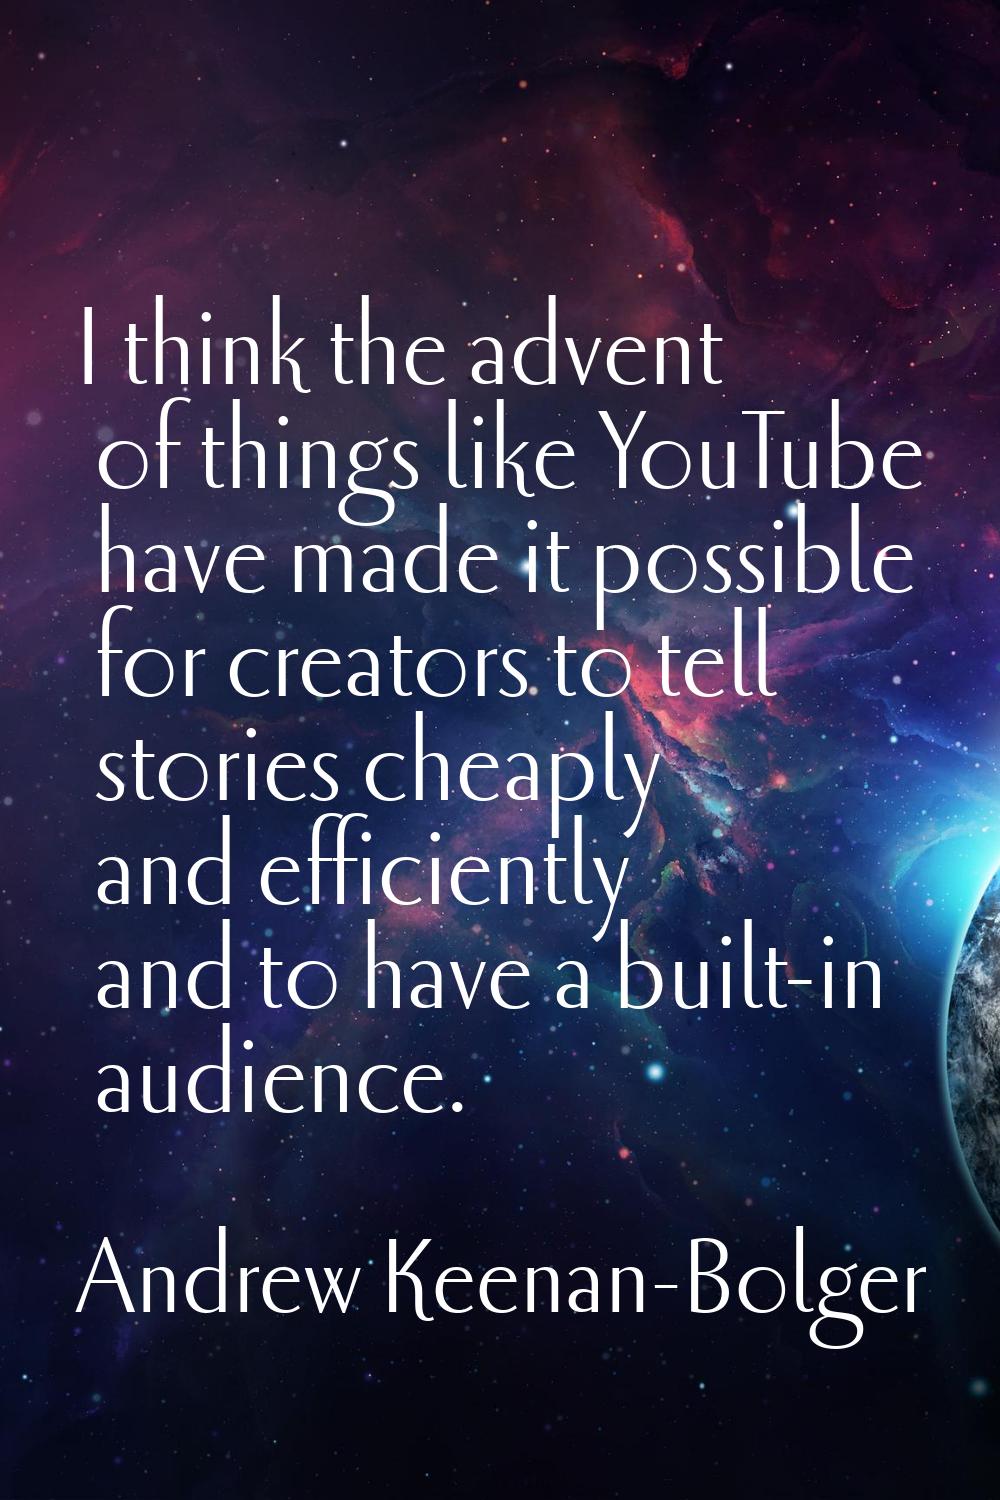 I think the advent of things like YouTube have made it possible for creators to tell stories cheapl